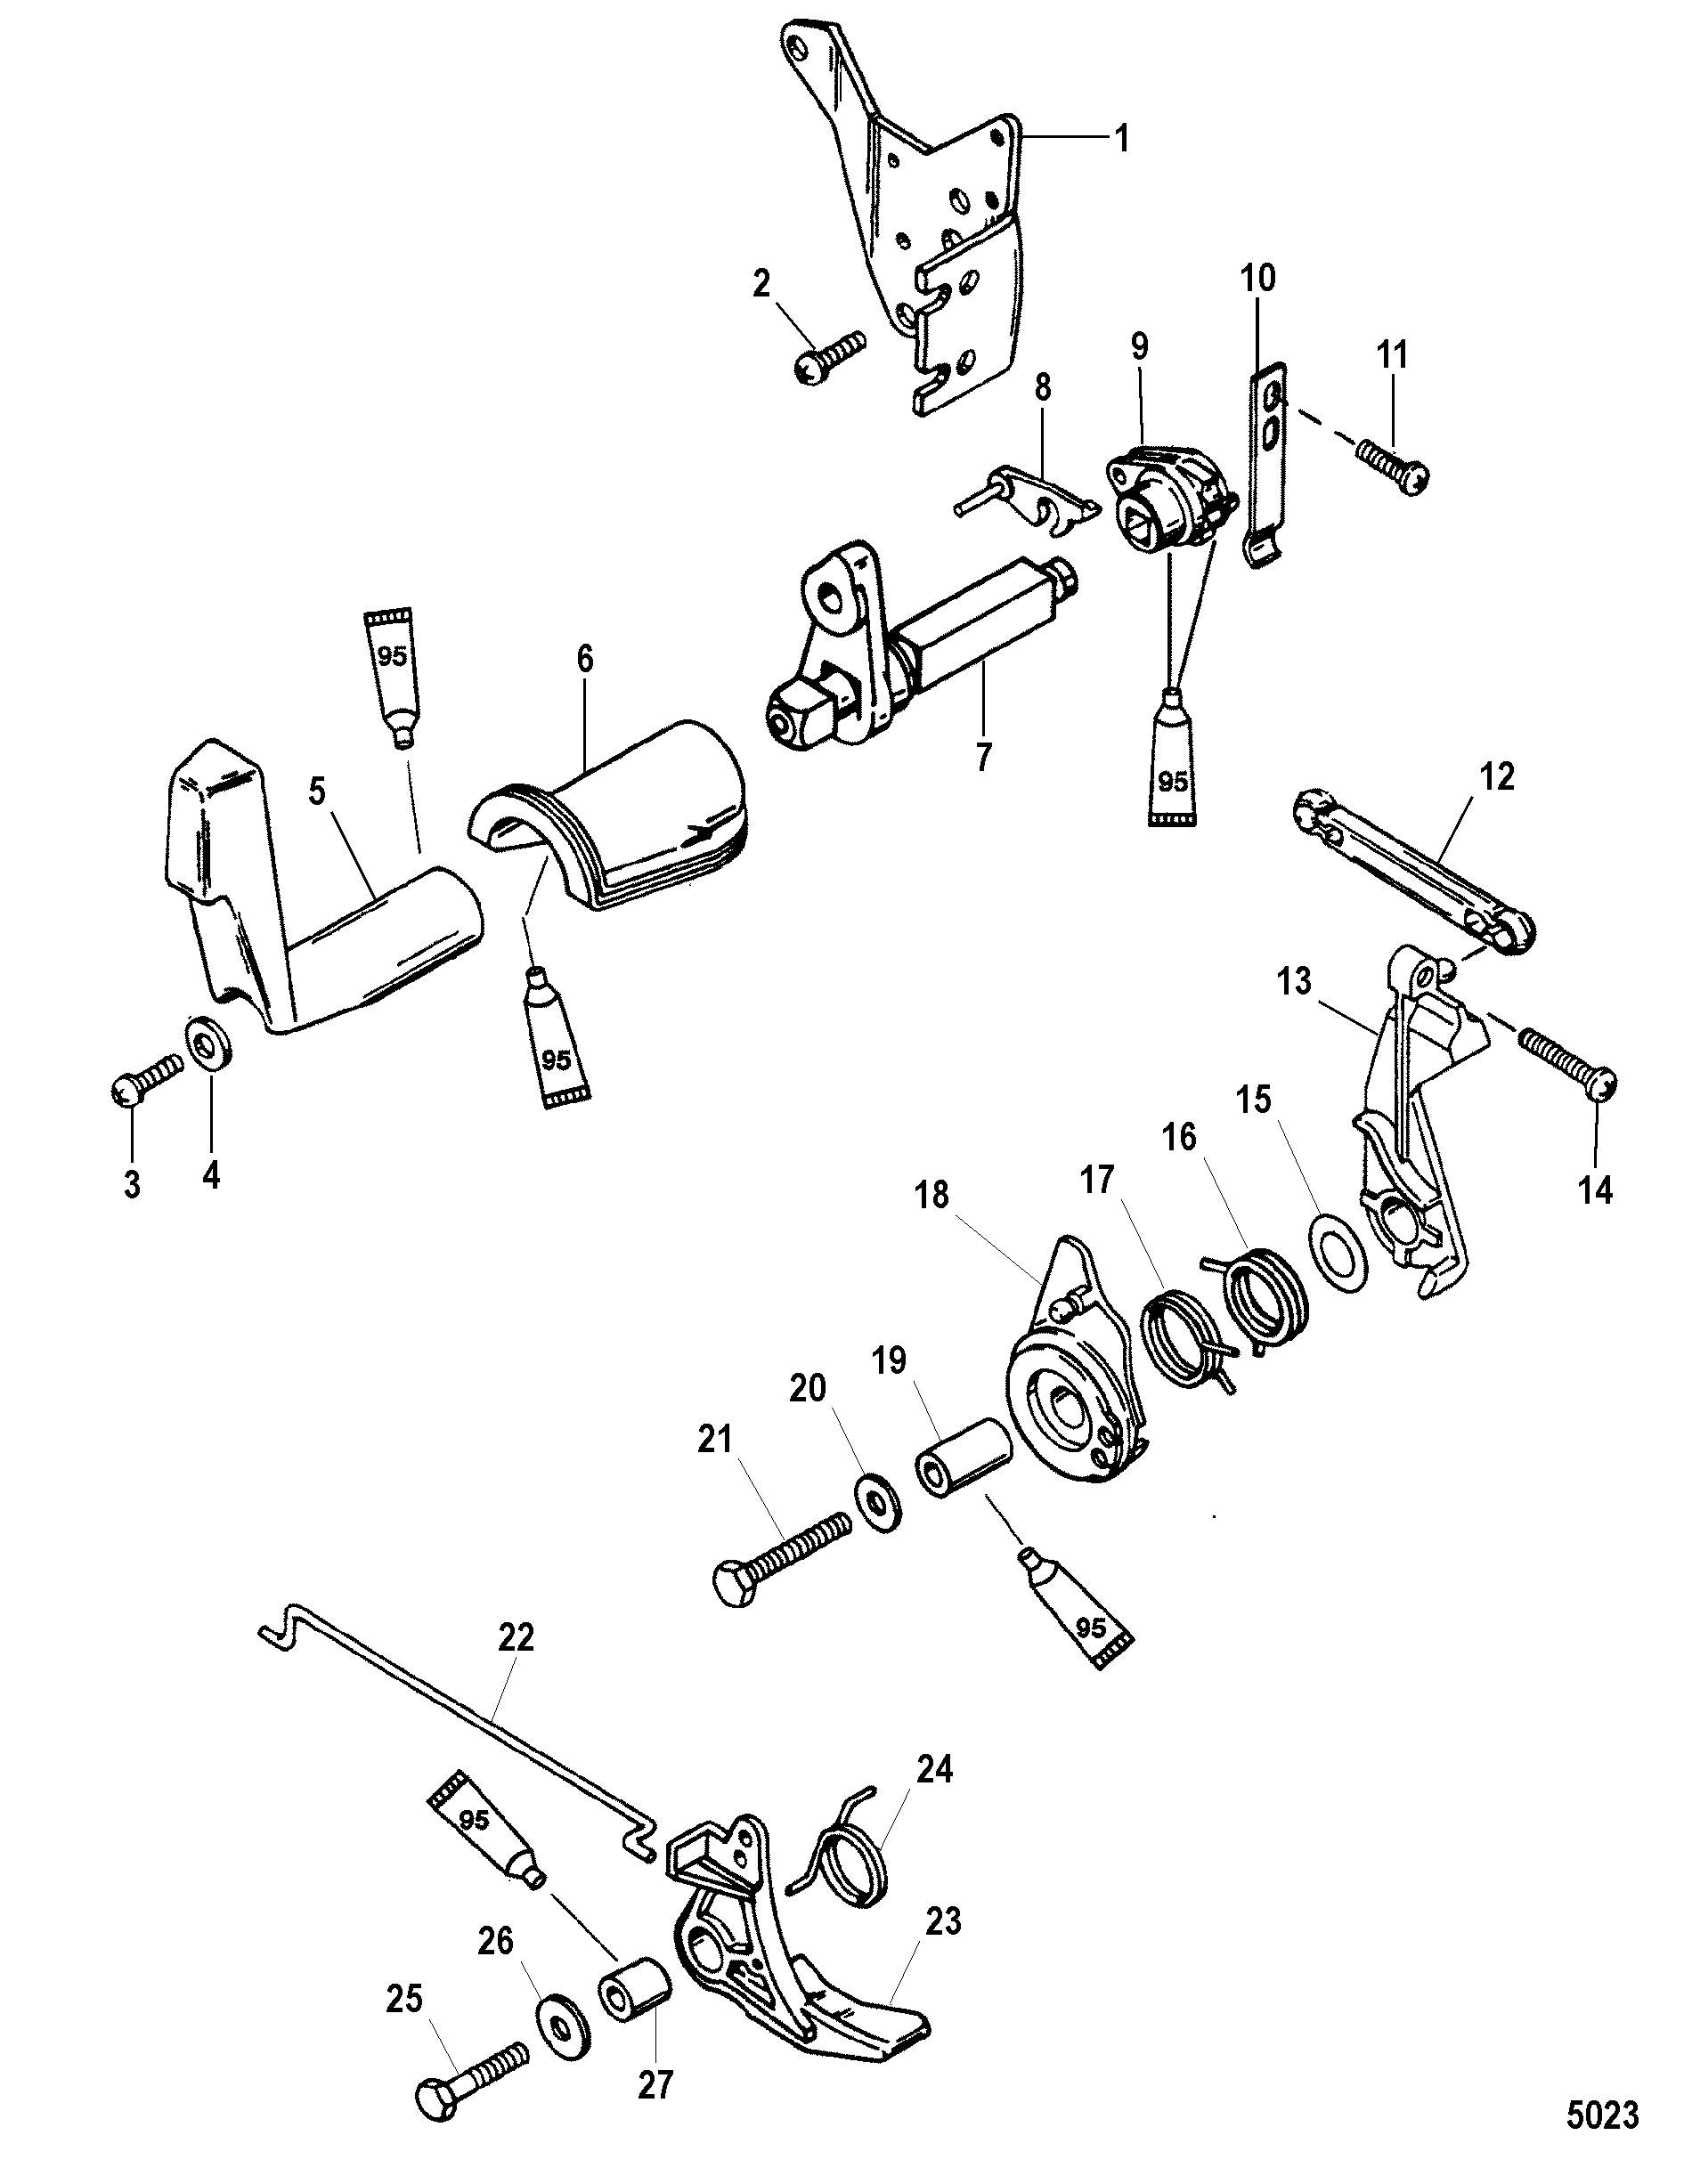 Throttle and Shift Linkage(Side Shift)